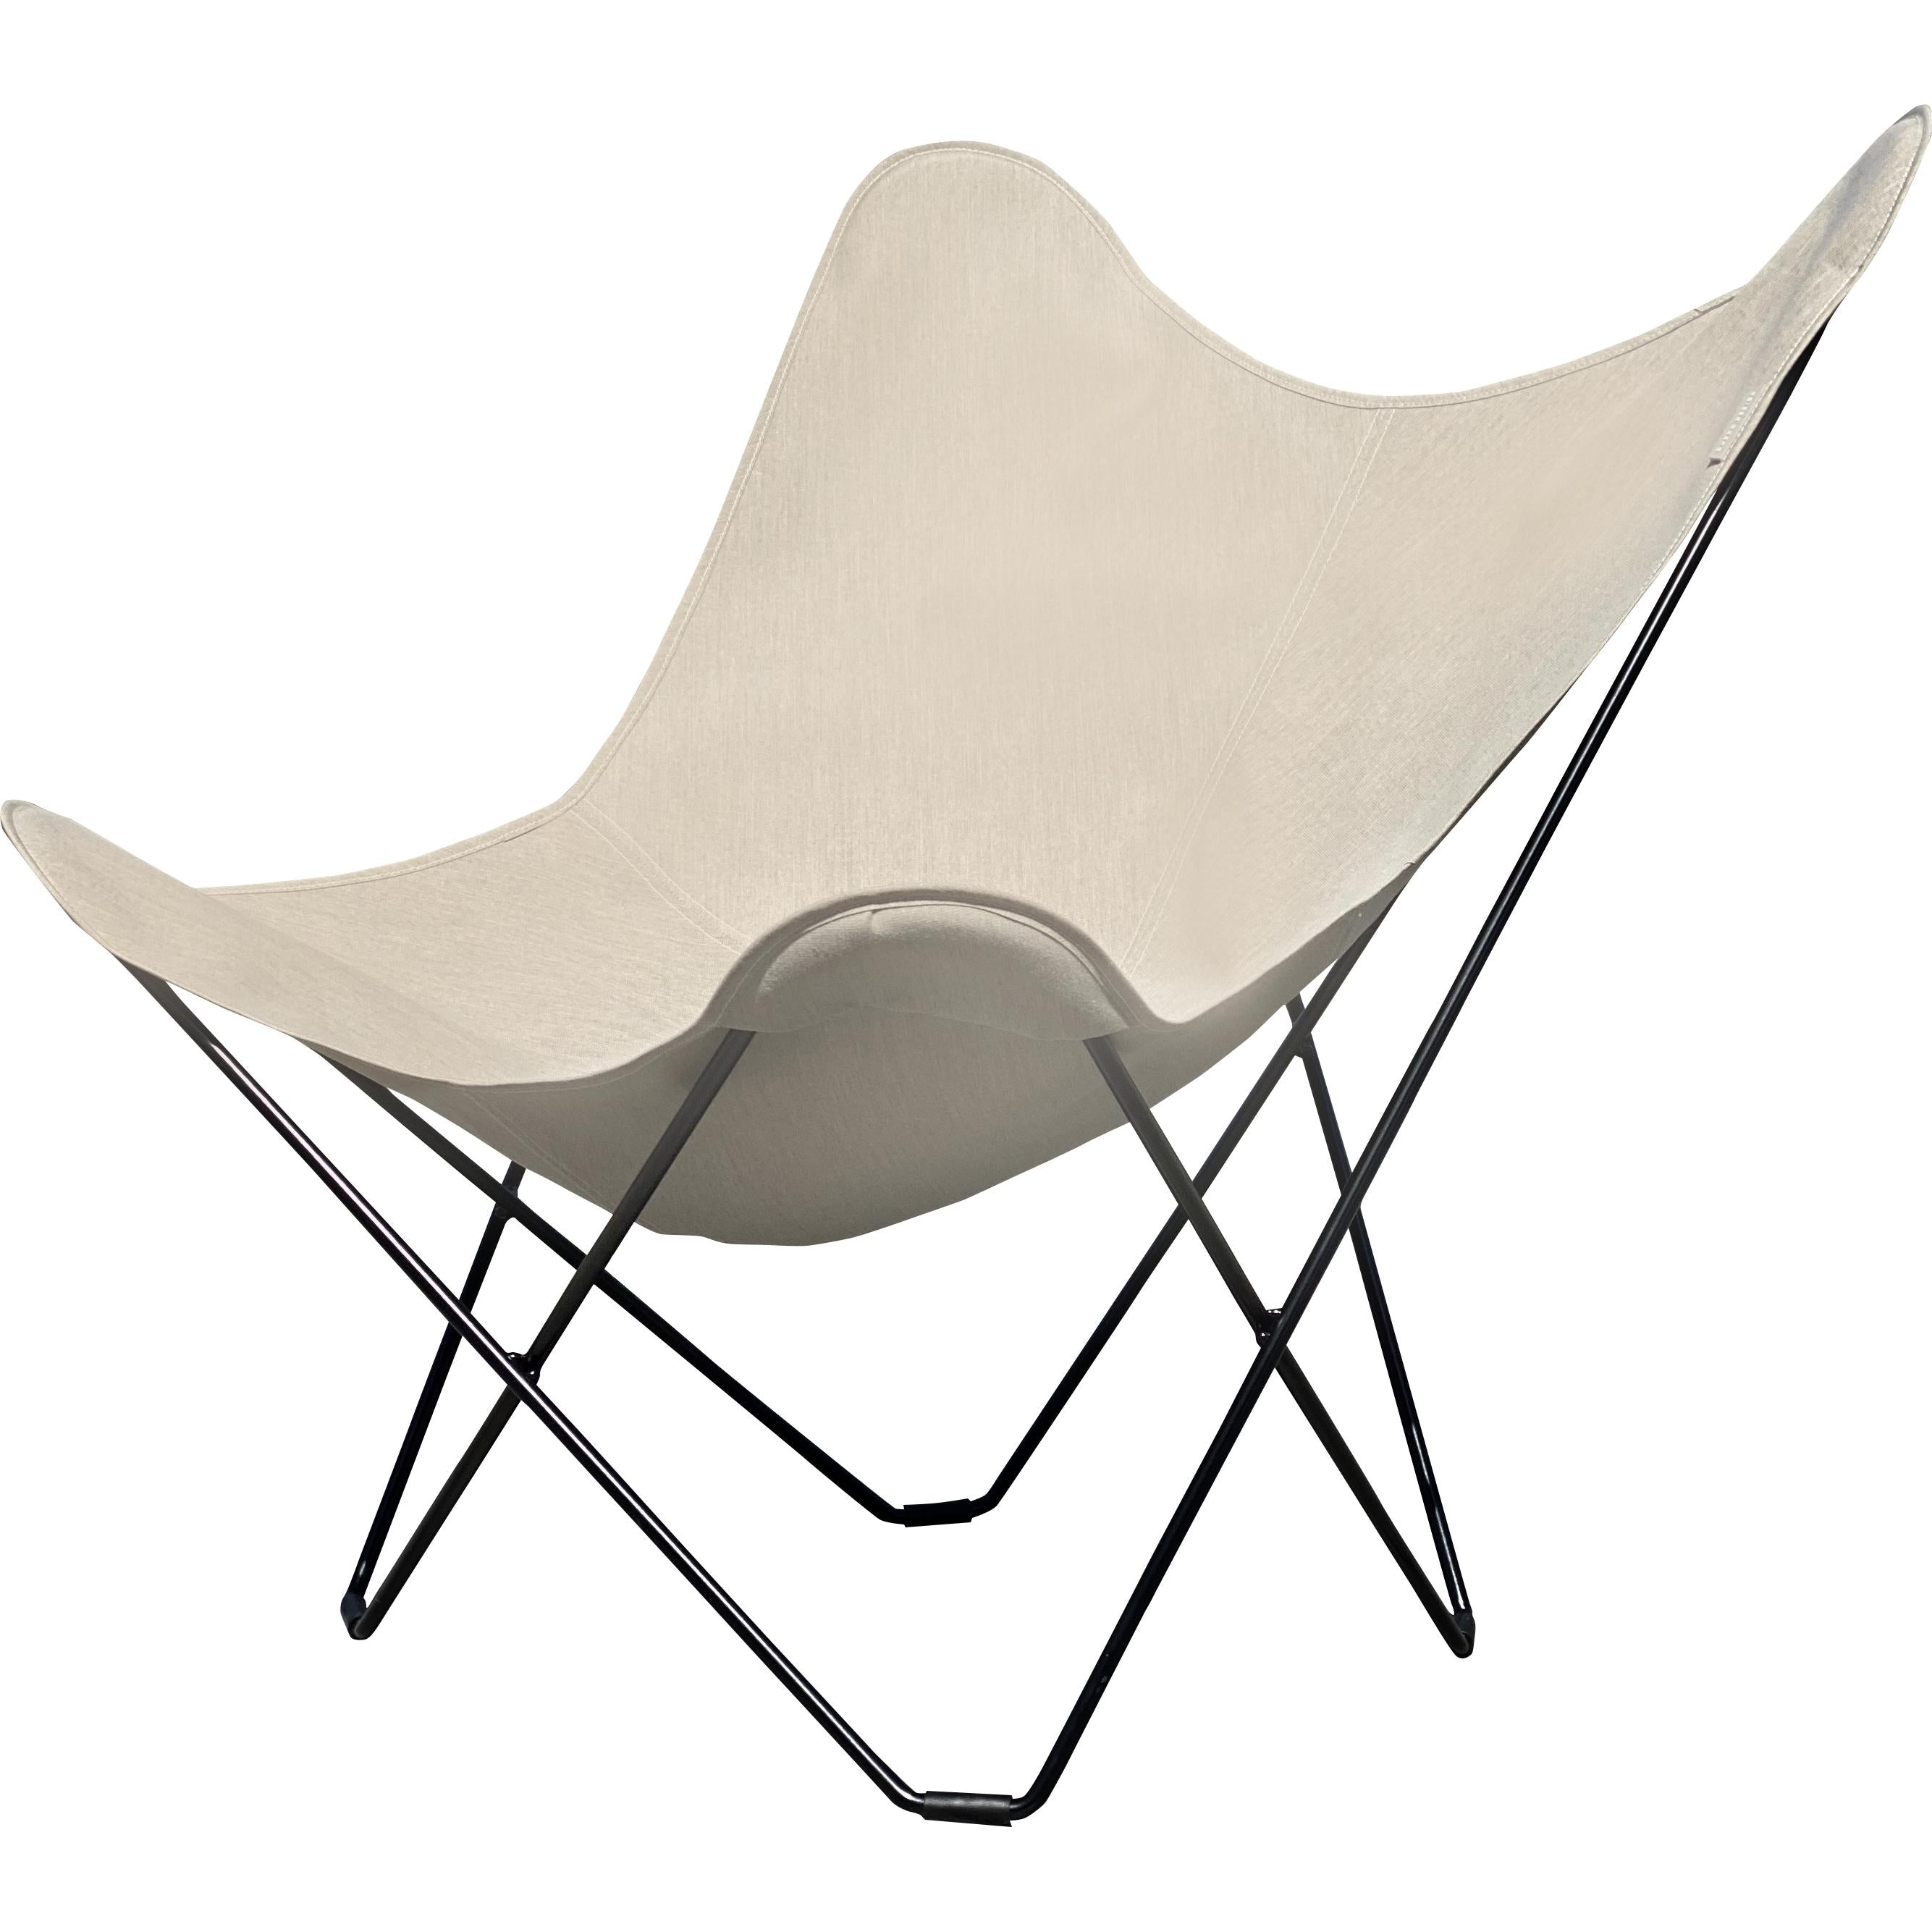 Cuero Sunshine Mariposa Butterfly Chaise, Natural / Black Outdoor